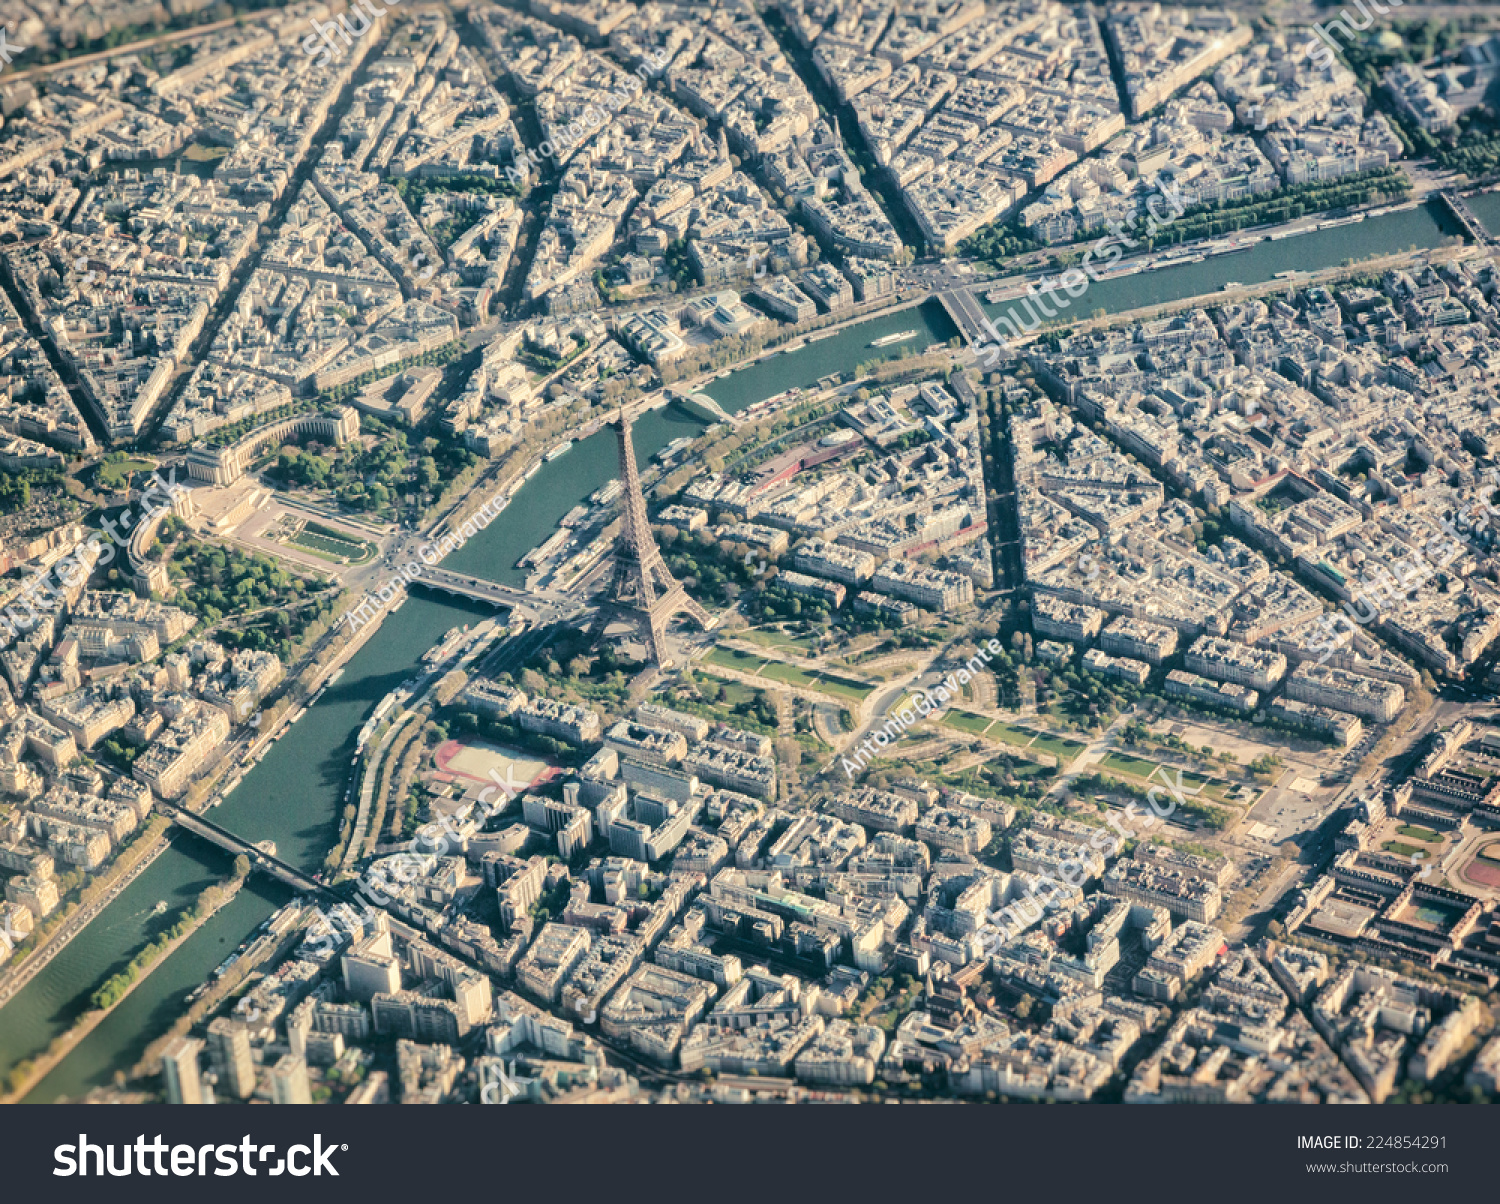 https://image.shutterstock.com/z/stock-photo-aerial-view-from-airplane-of-paris-with-eiffel-tower-224854291.jpg